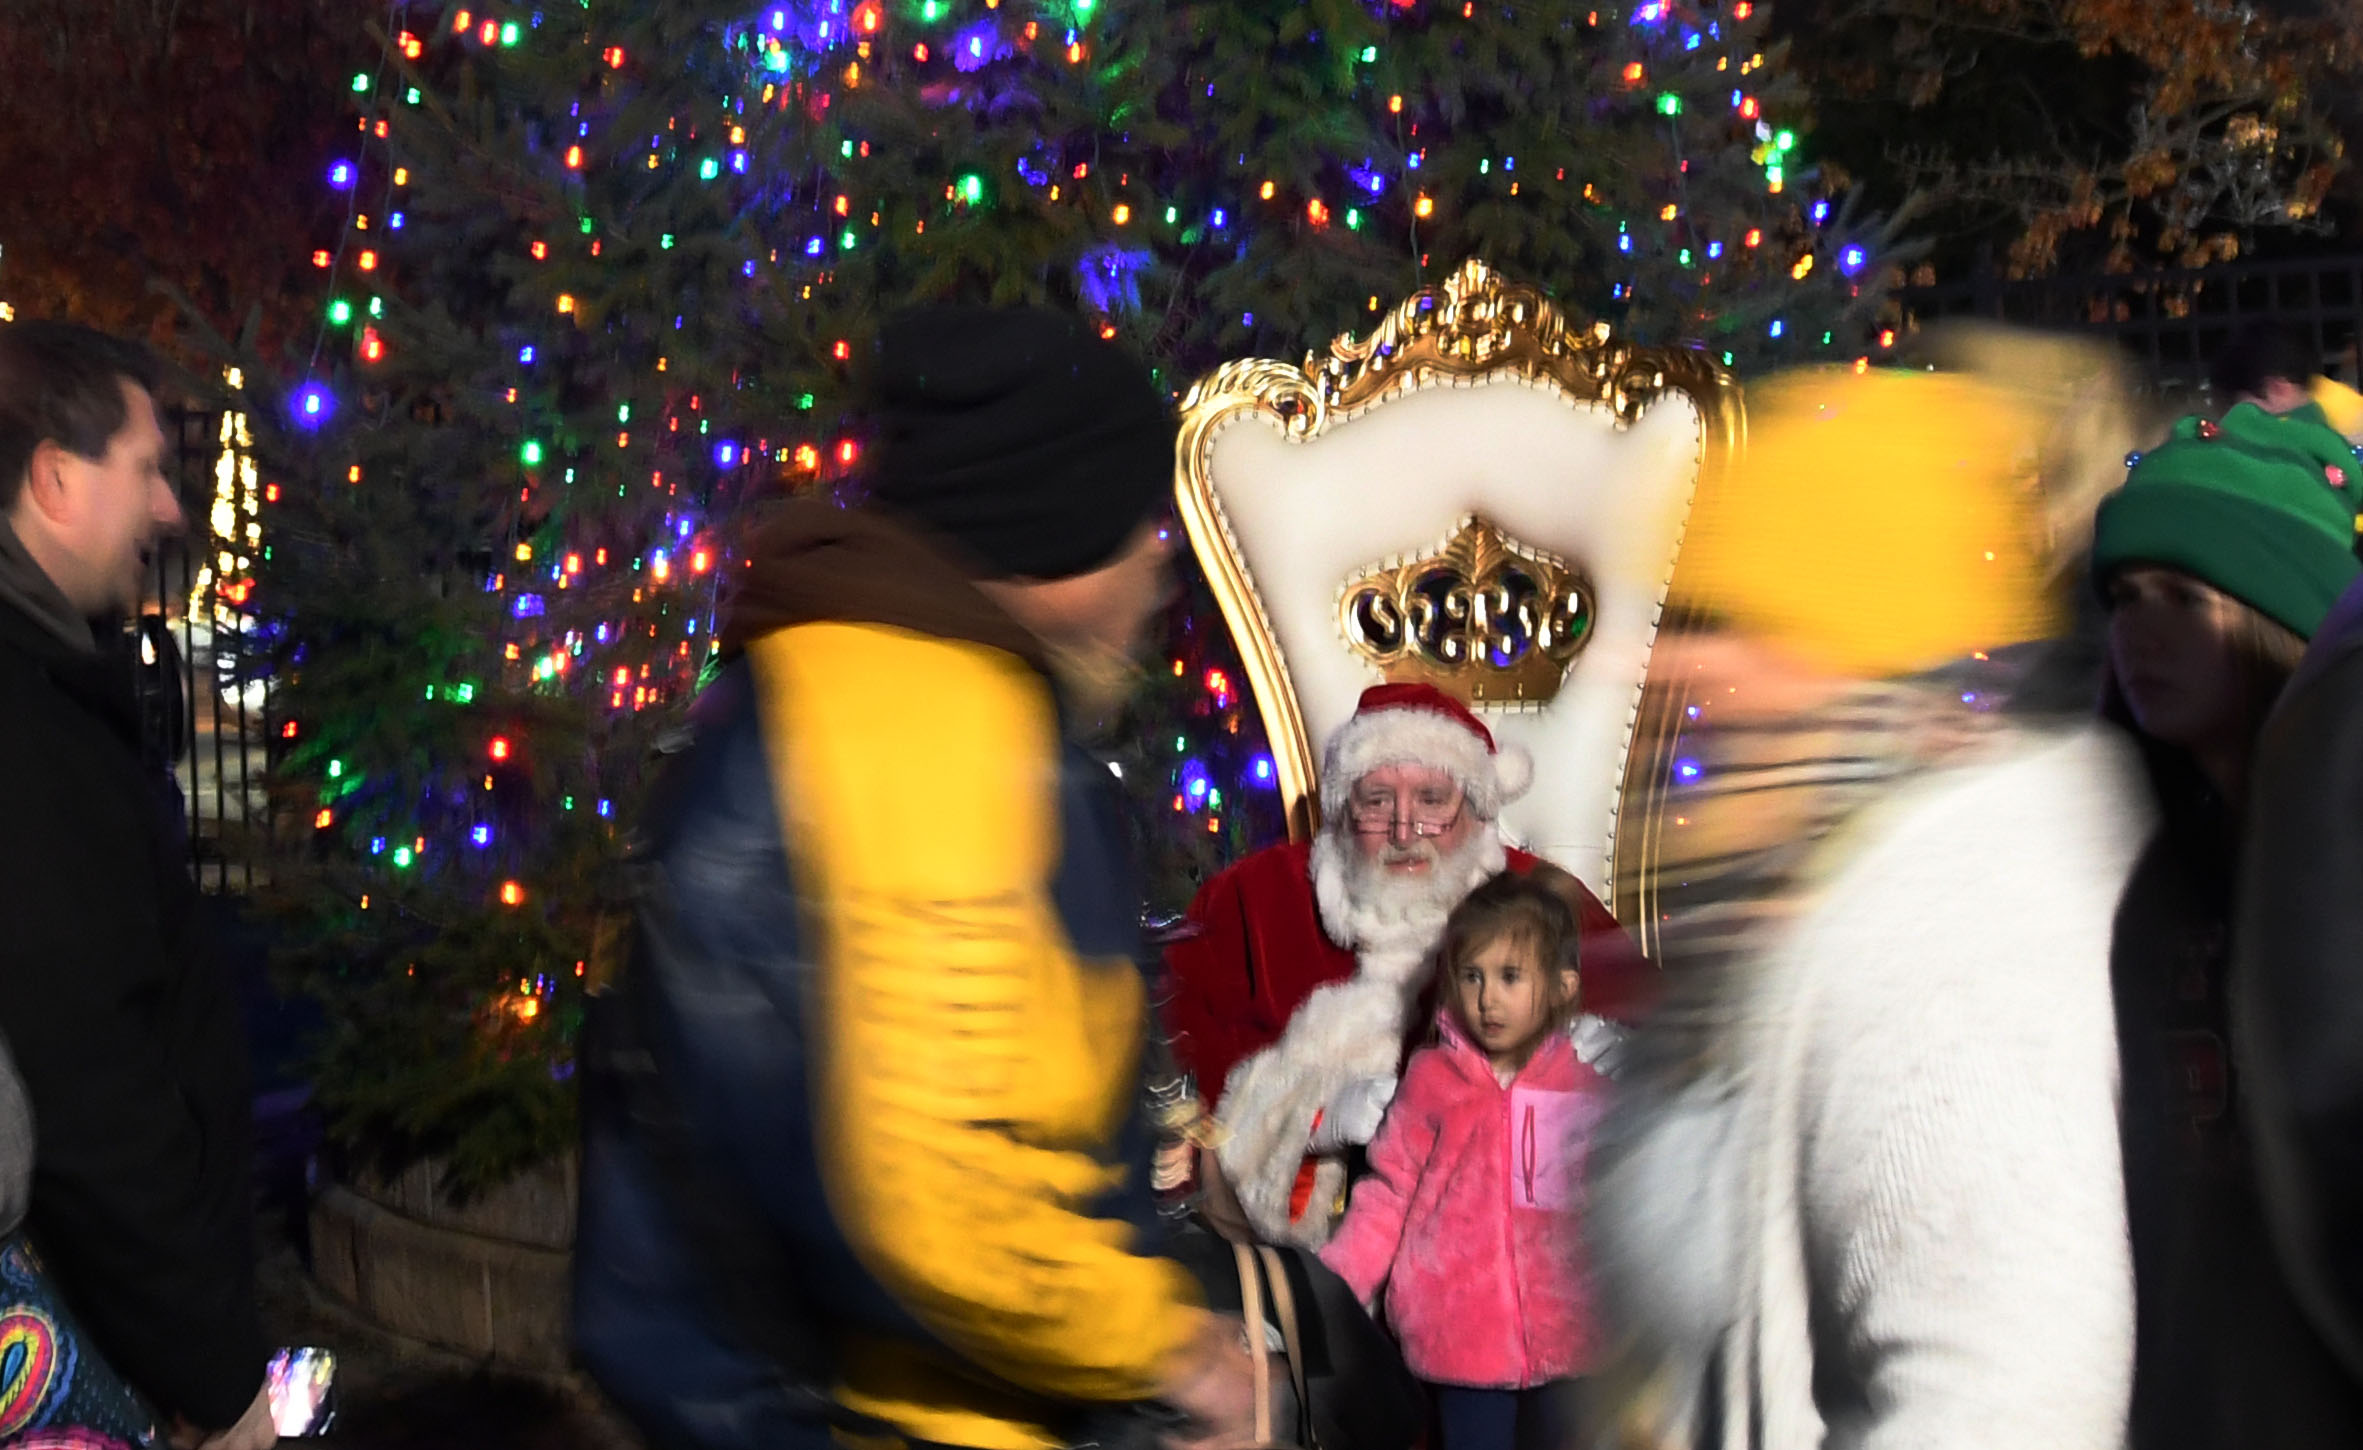 60 festive and fun things to do at the Jersey Shore this weekend